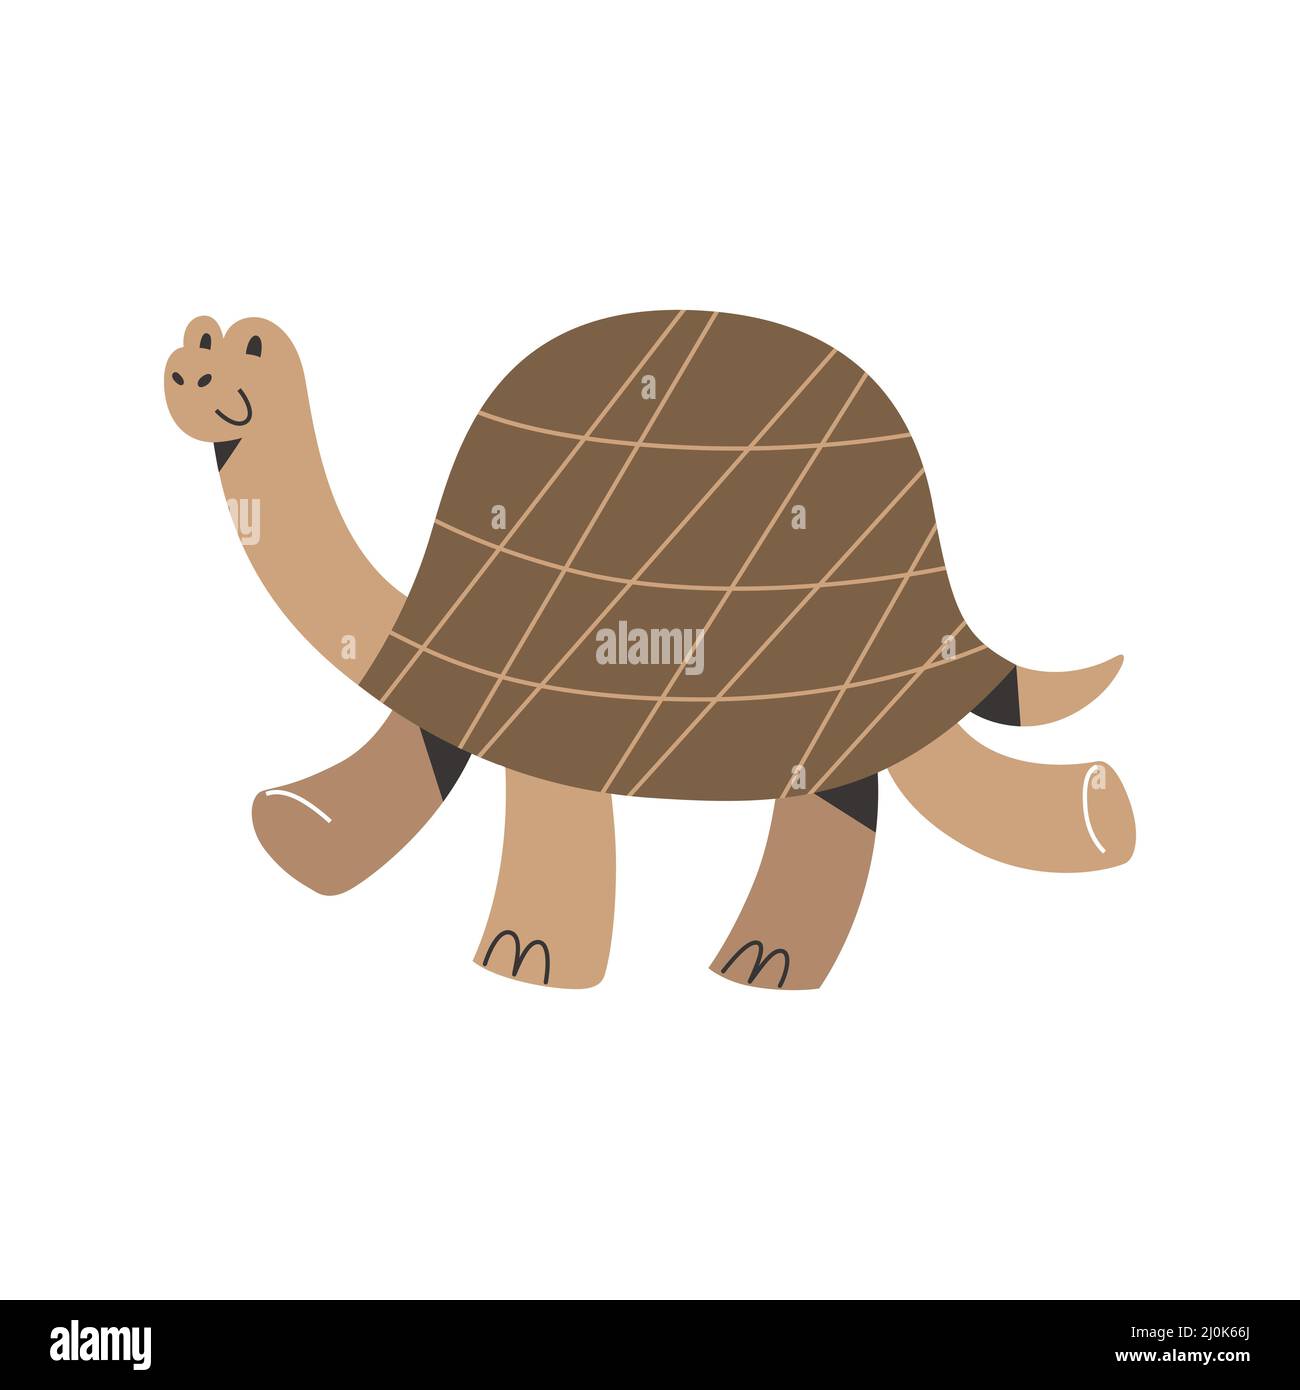 Big turtle with smile and face expression walking, funny mascot, isolated vector illustration on white Stock Vector